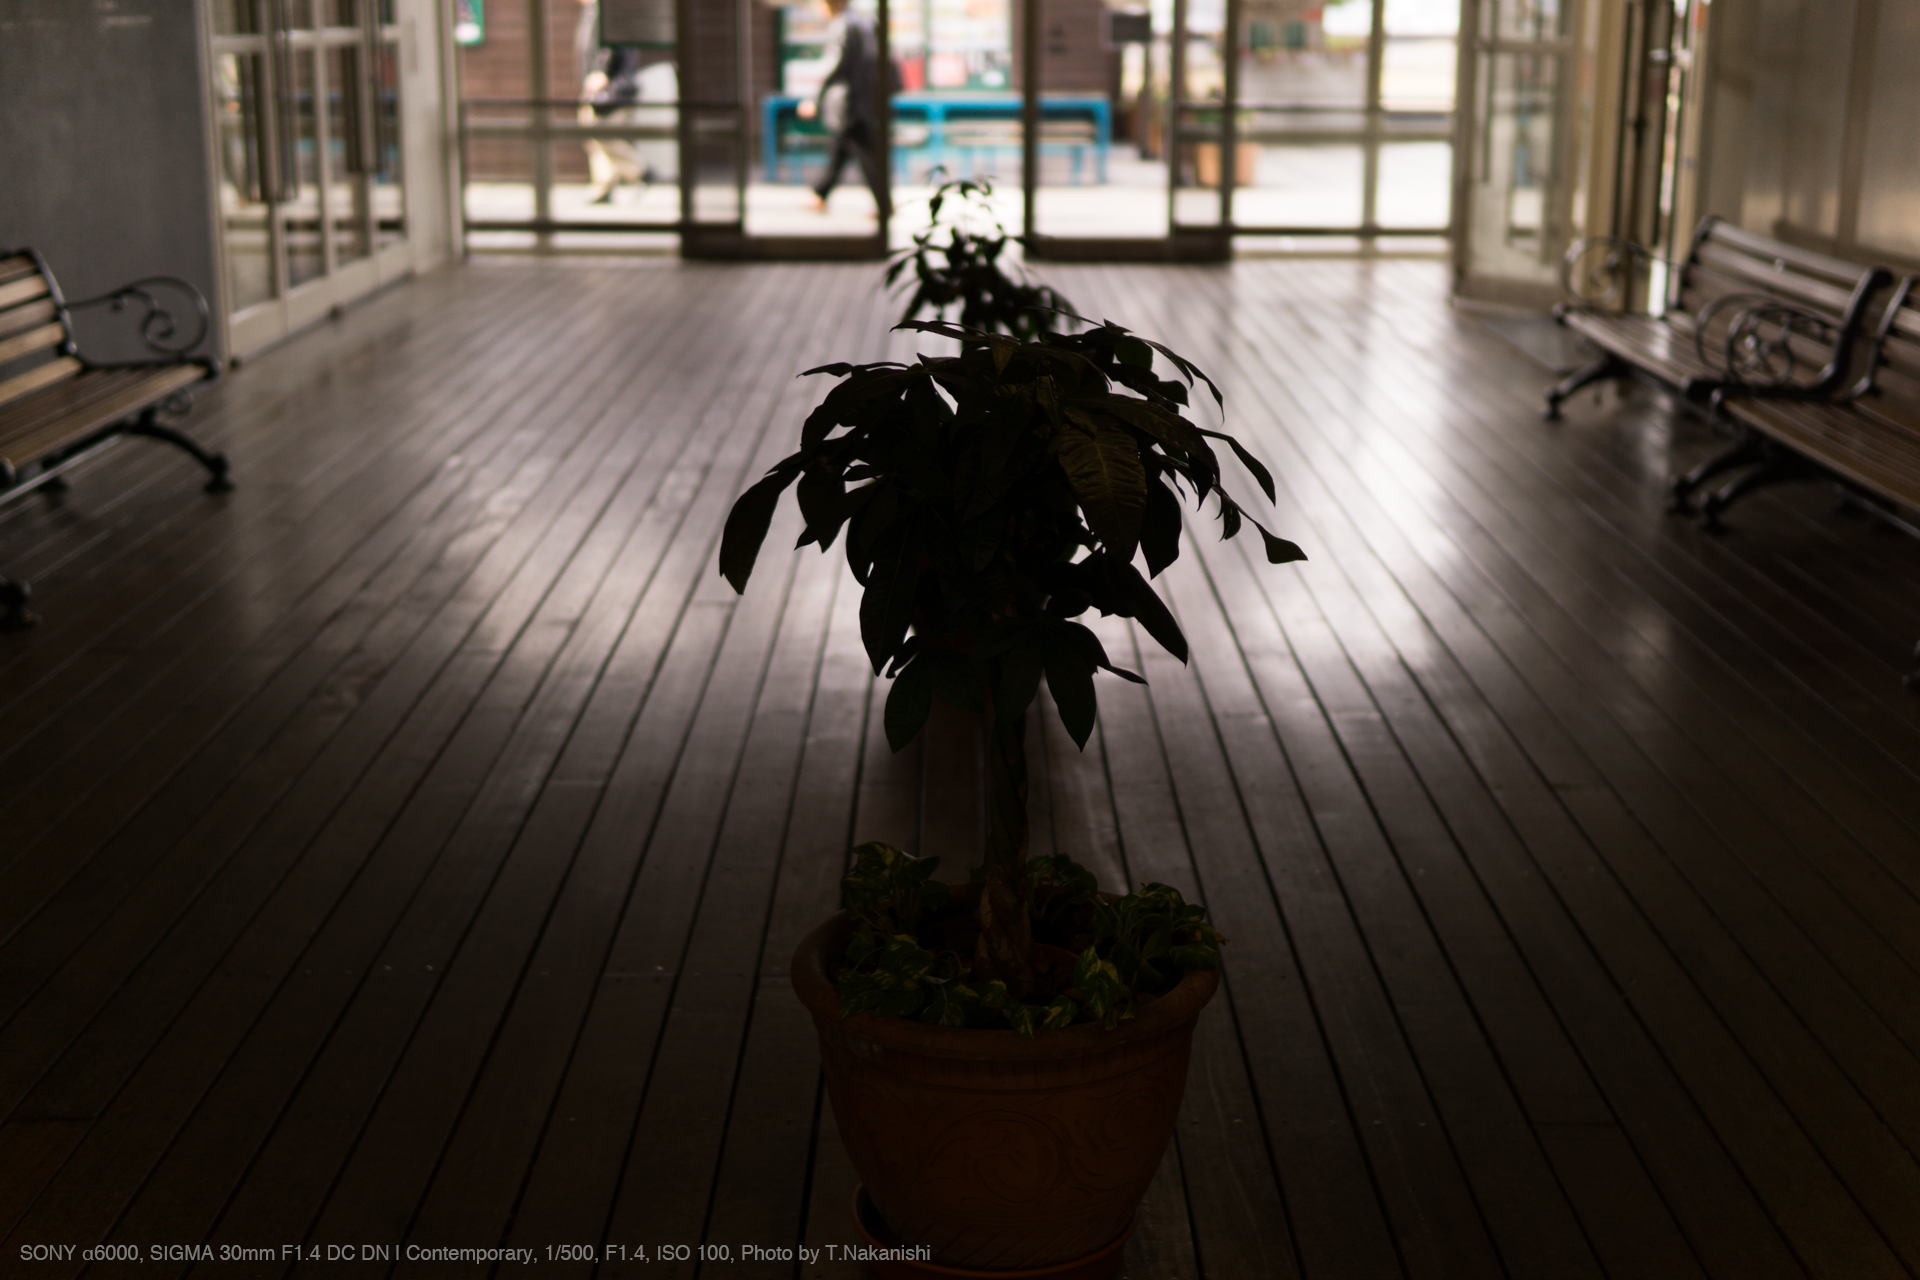 SONY α6000, SIGMA 30mm F1.4 DC DN | Contemporary, 1/500, F1.4, ISO 100, Photo by T.Nakanishi